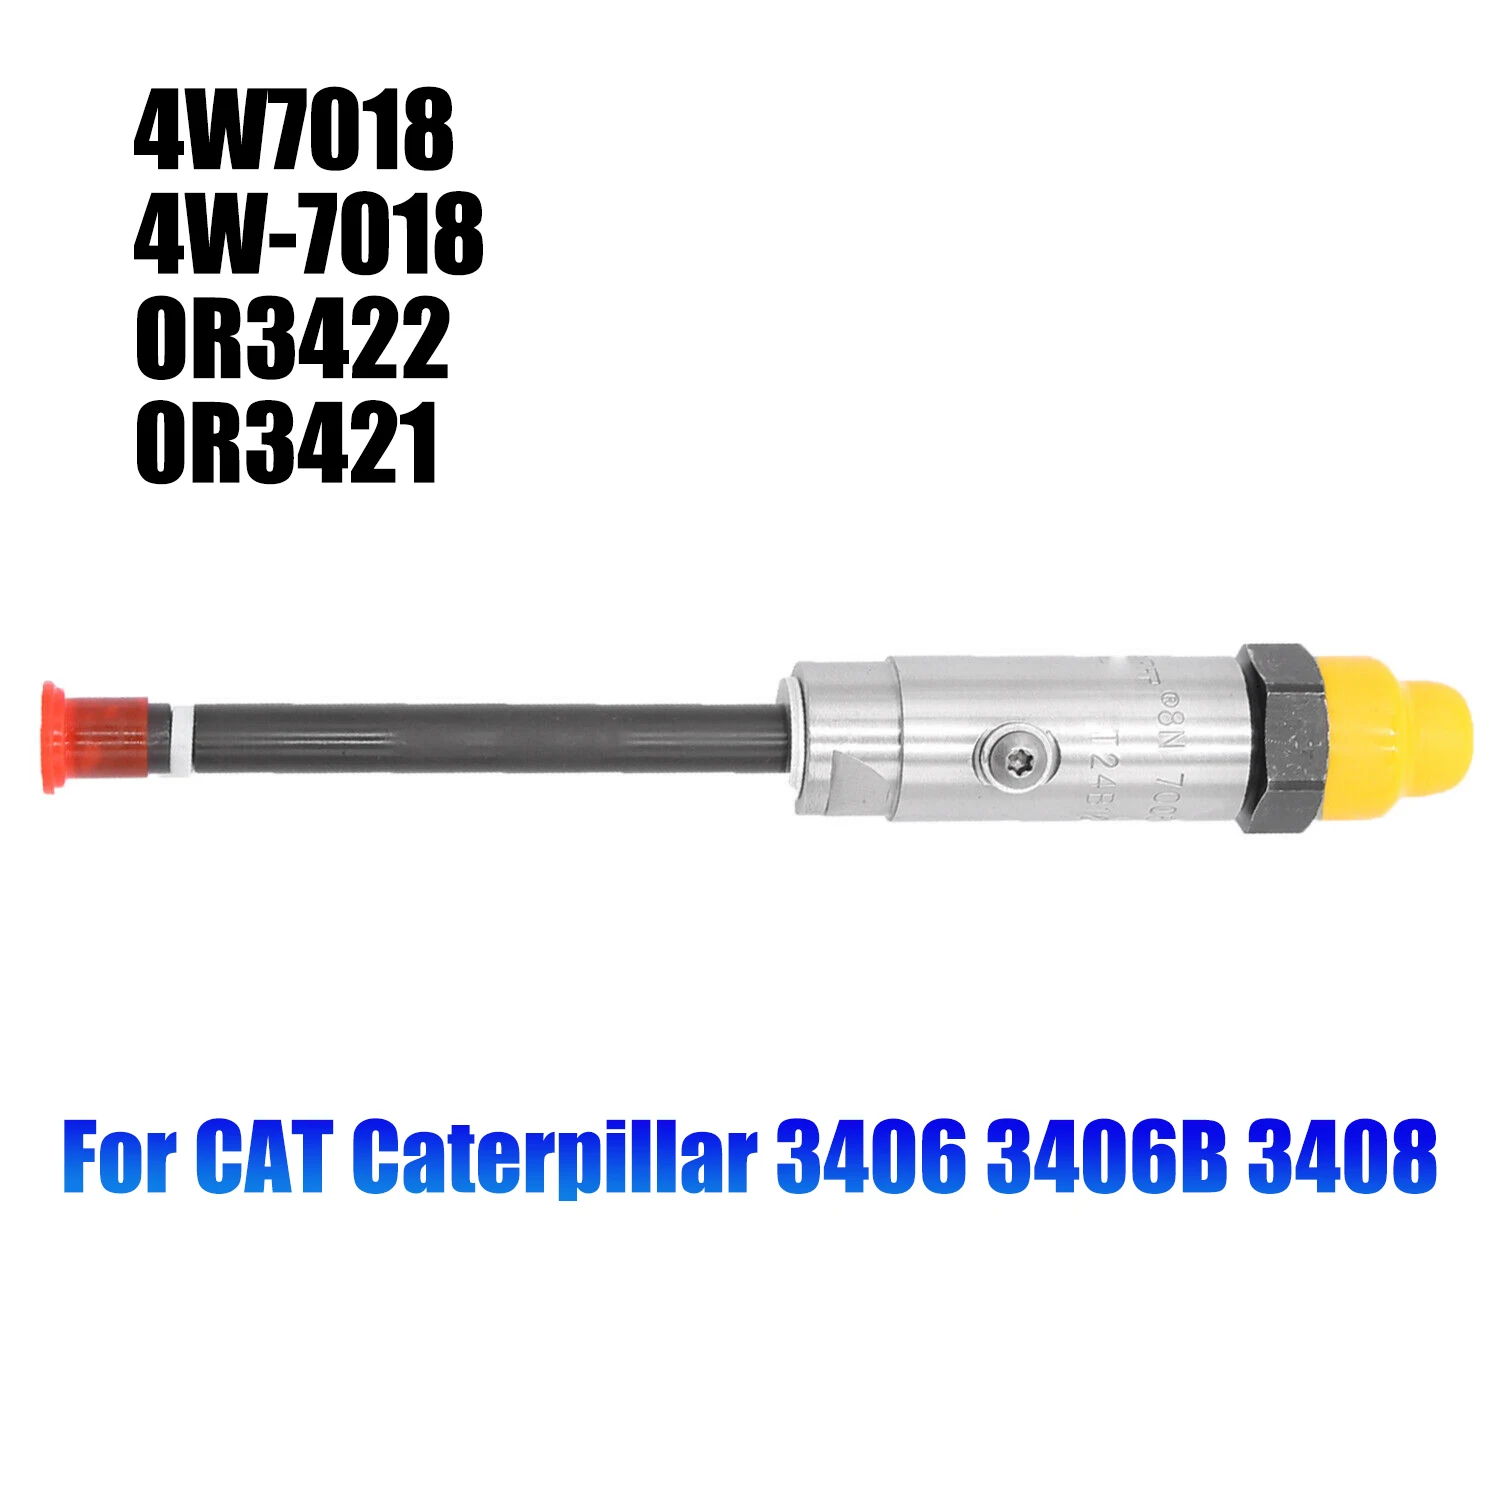 

6PCS New Fuel Injector Nozzle 4W7018,OR3422 Fits for Caterpillar CAT 3406,3408,988 Loader